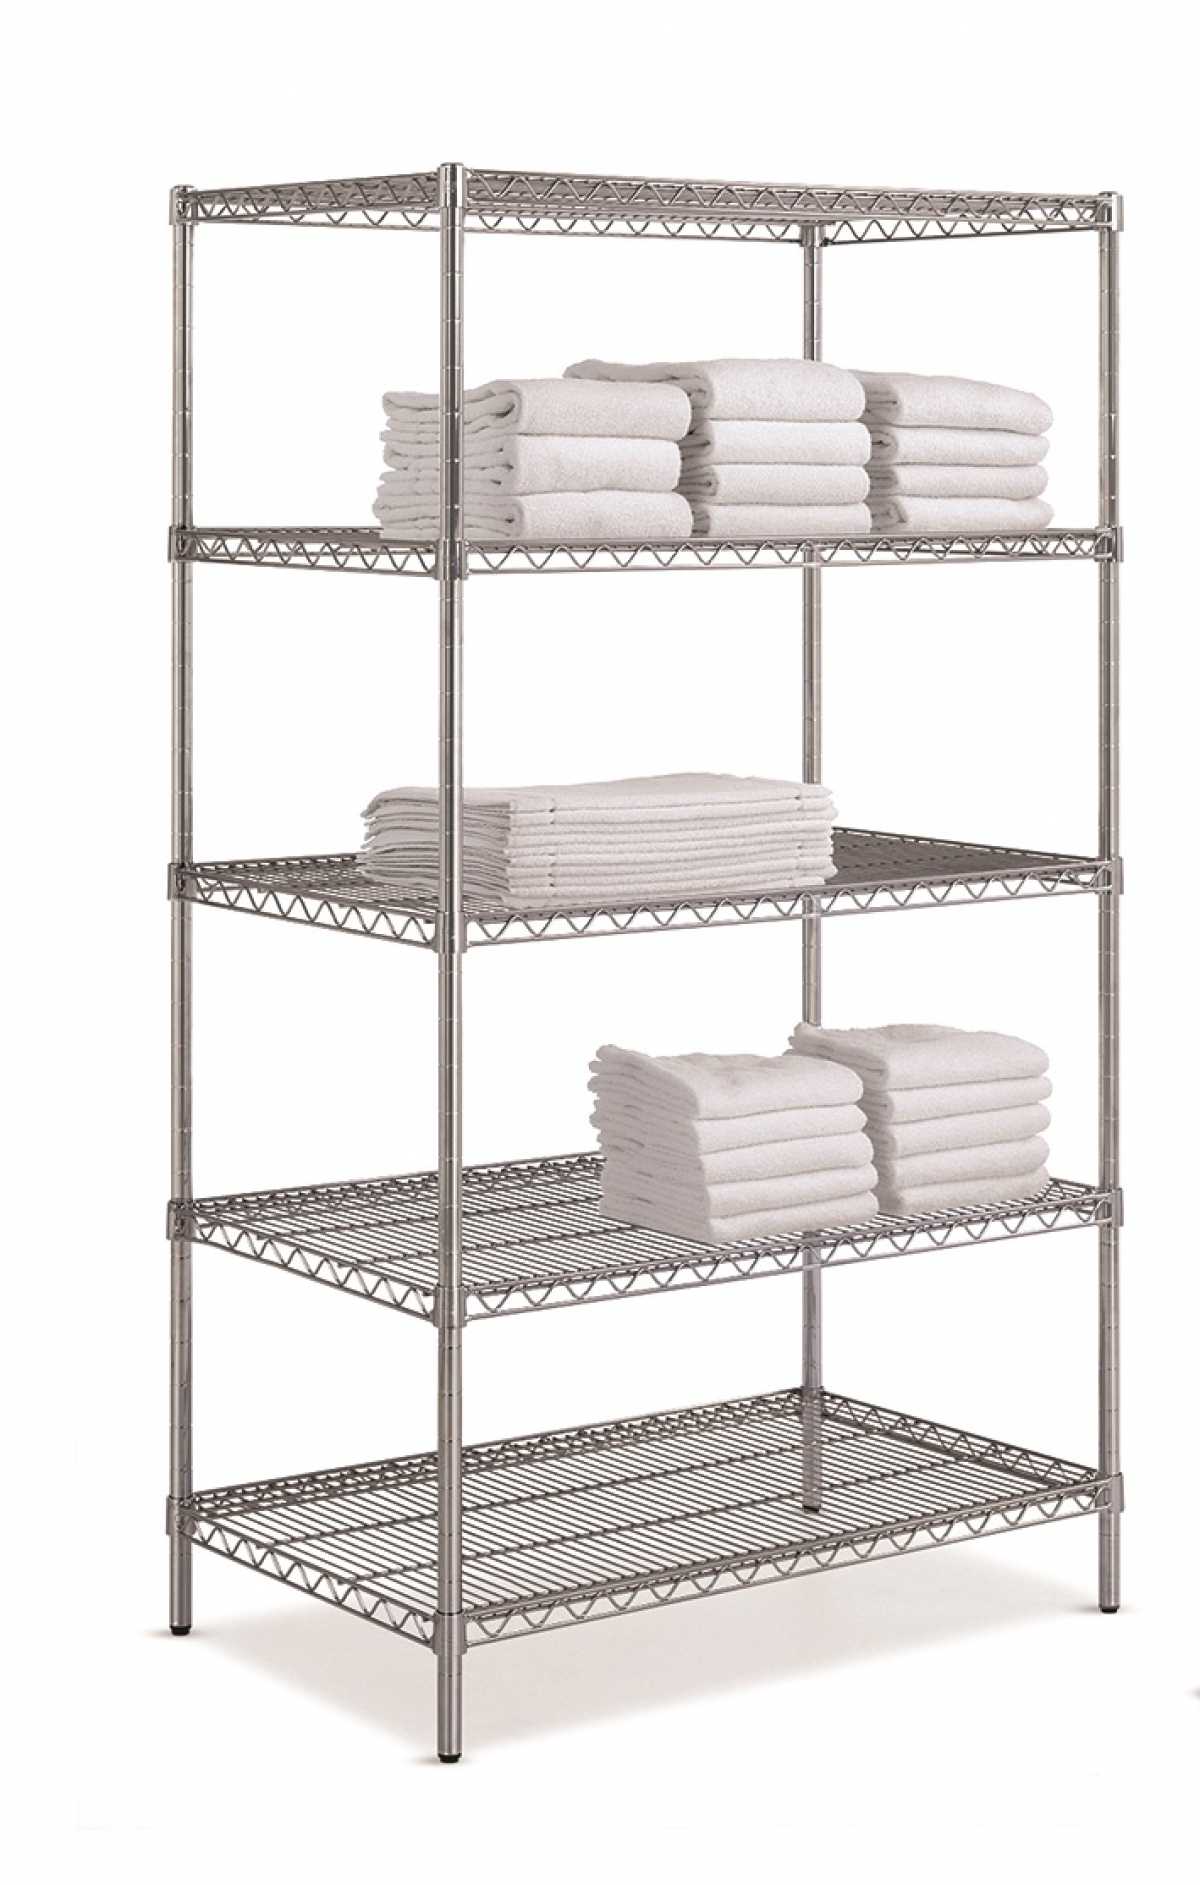 WANZL High Rack Fixed Shelving Systems